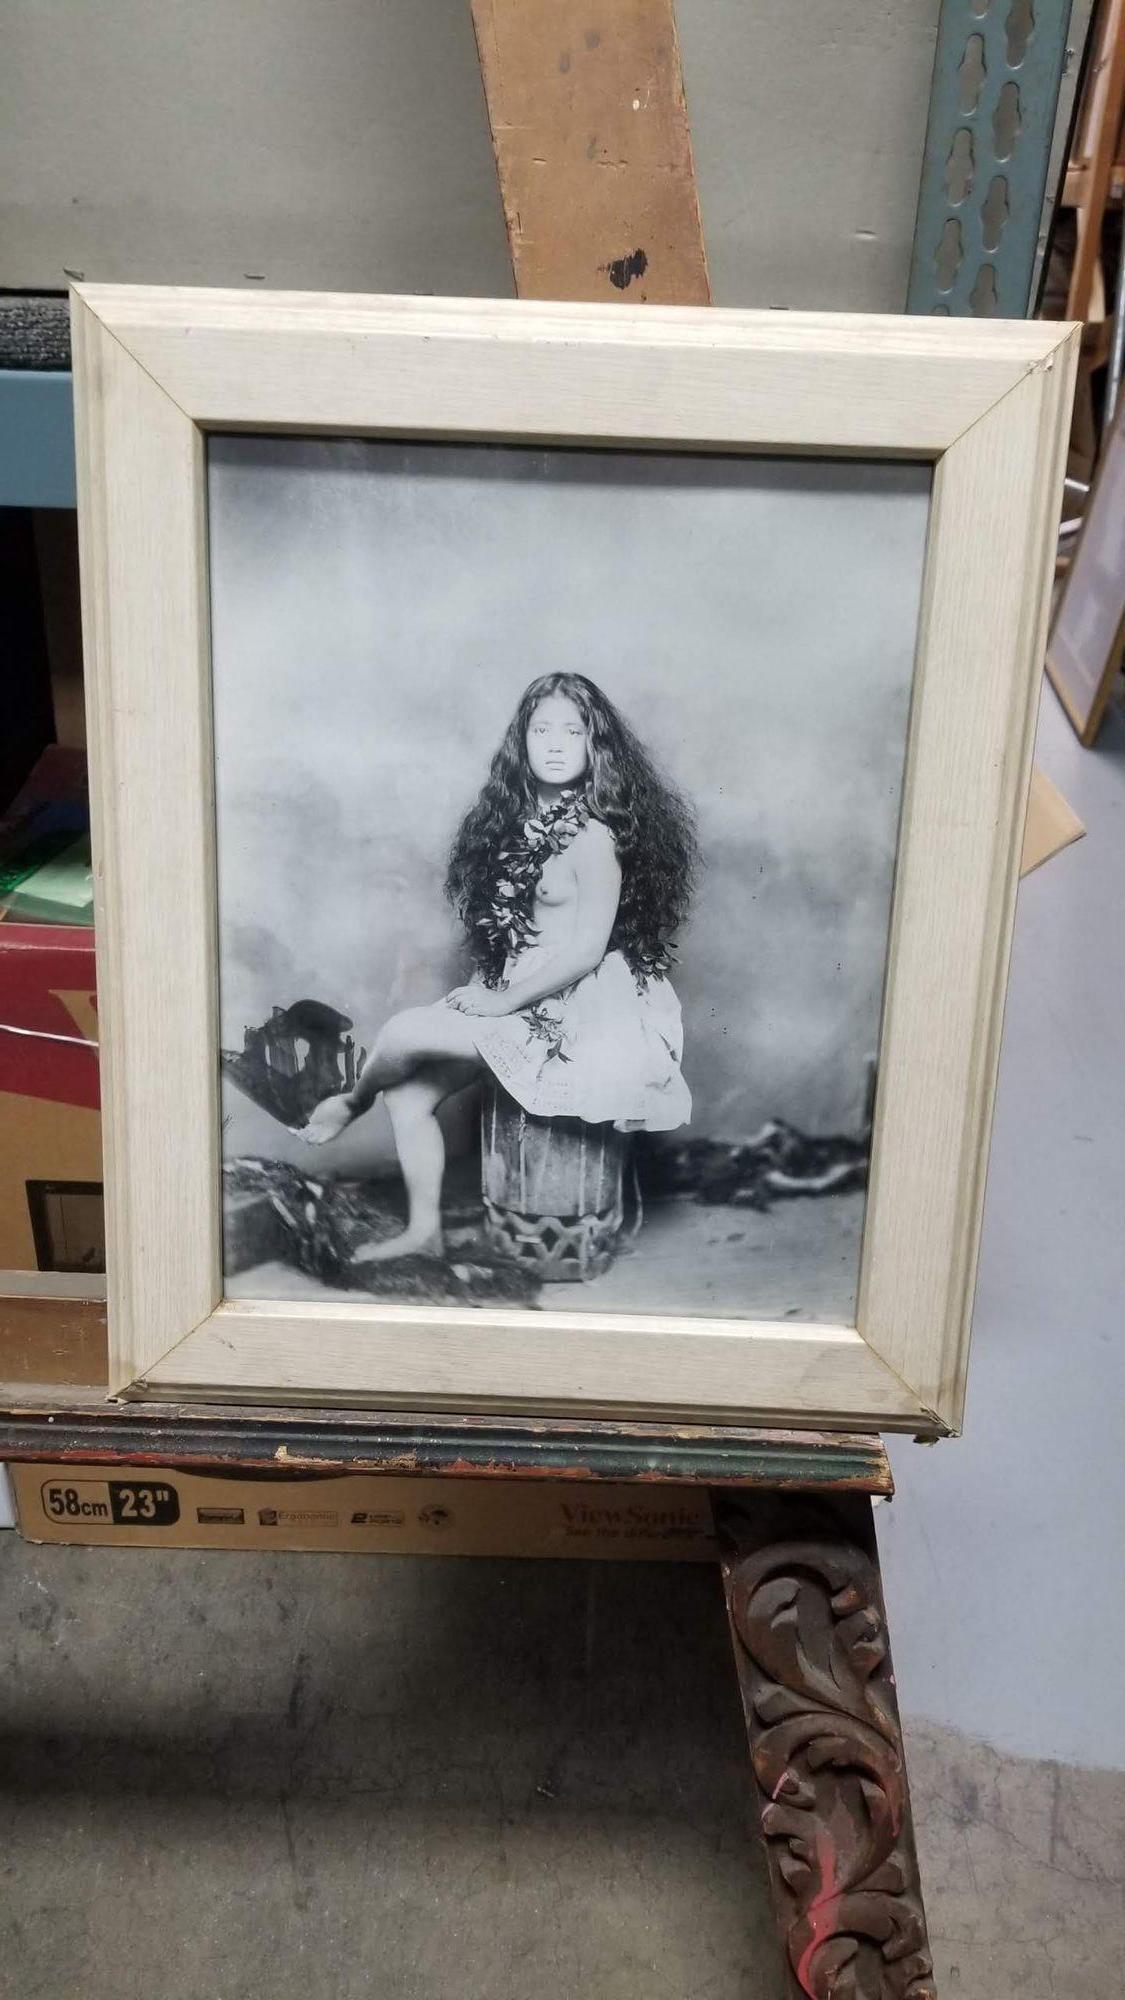 Commercial hula performer in a pau (skirt) circa 1885, several decades after Hawaiian women adopted holok ū for everyday domestic purposes (photo courtesy of the Bernice P. Bishop Museum). The Artwork print comes in a solid oak frame painted white